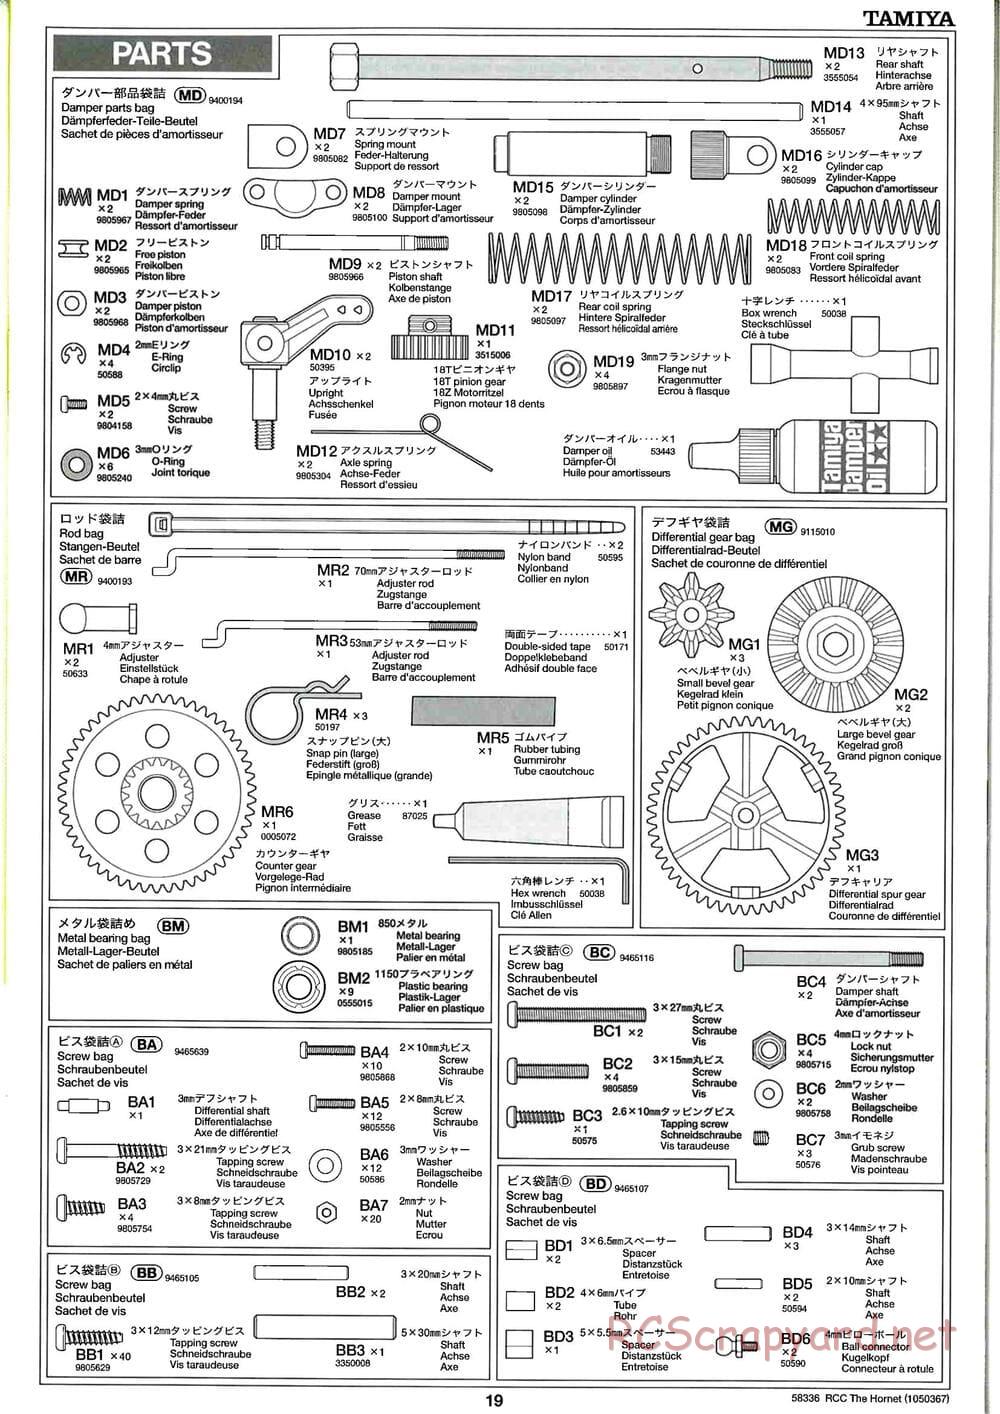 Tamiya - The Hornet (2004) - GH Chassis - Manual - Page 19